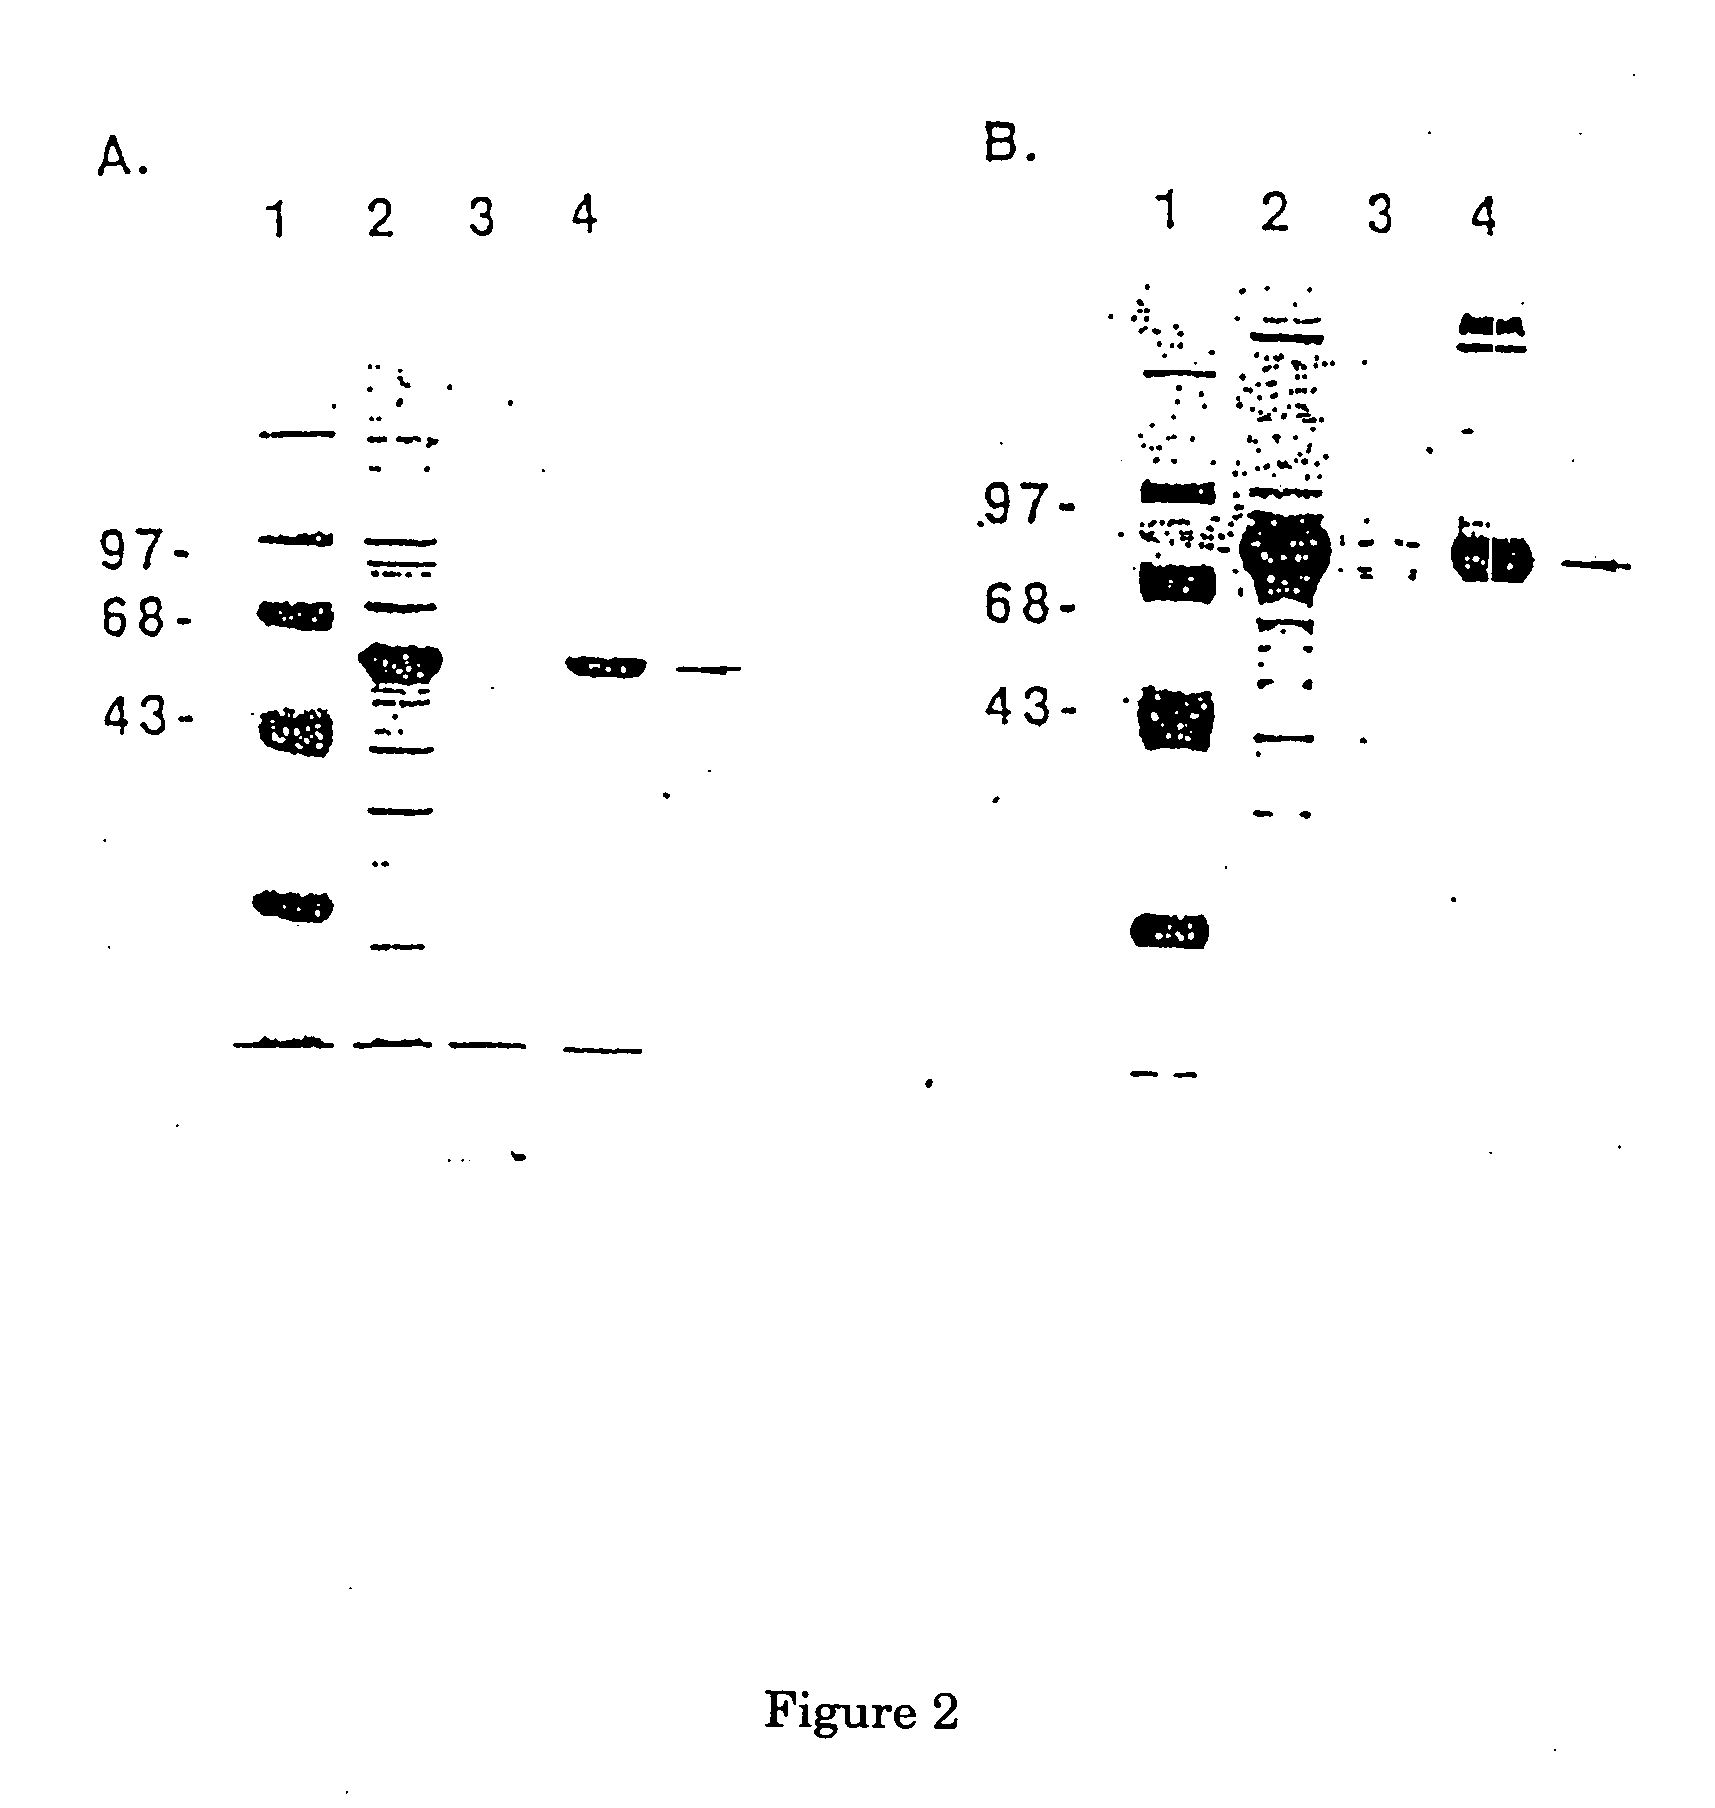 FcE-PE chimeric protein for targeted treatment of allergy responses a method for its production and pharmaceutical compositions containing the same